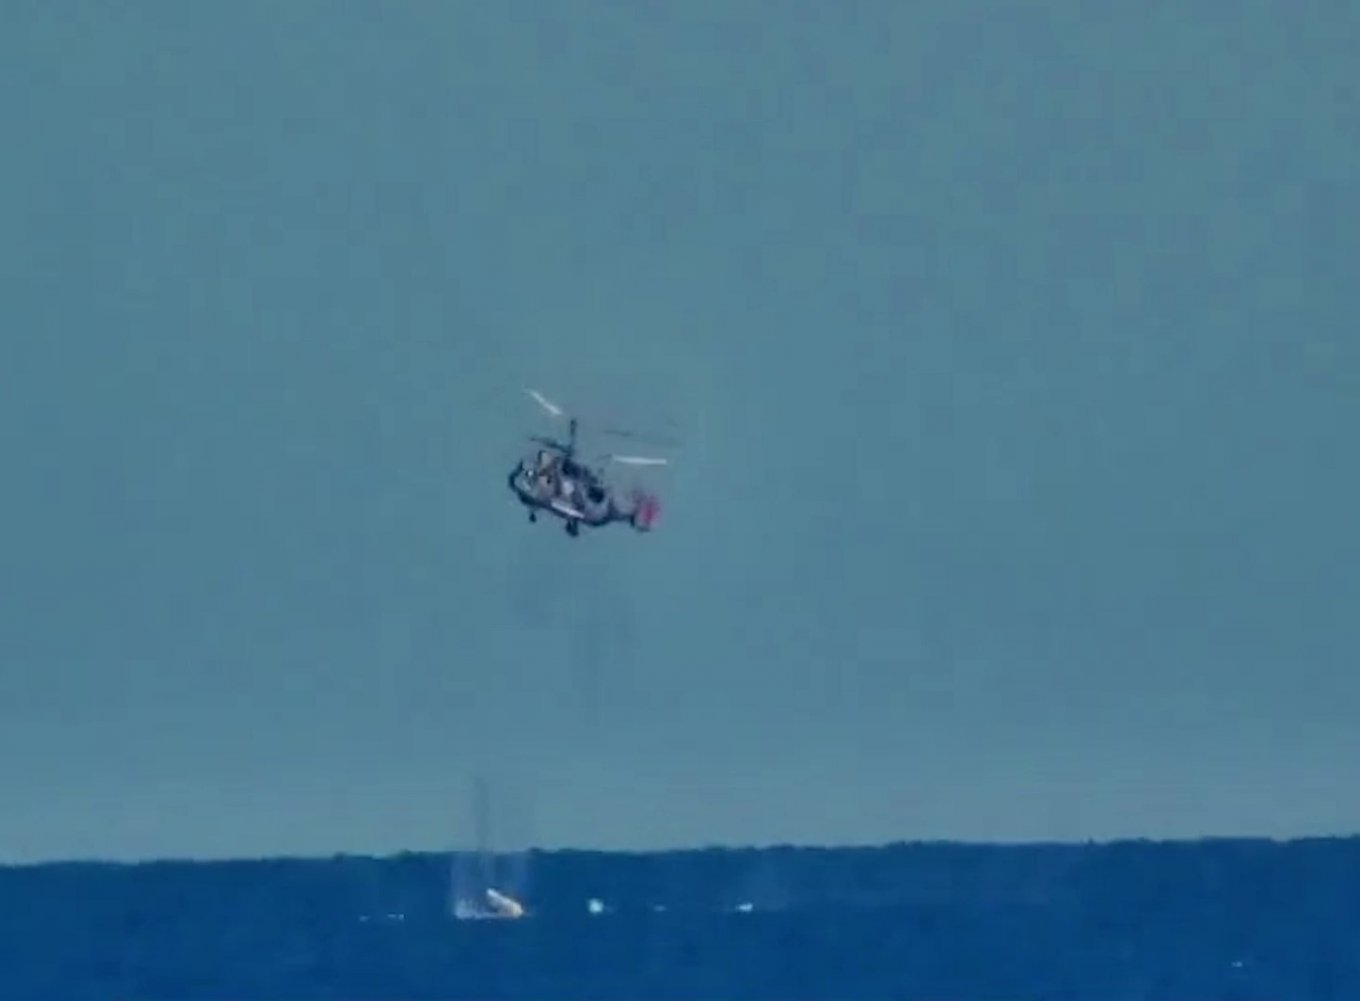 russian helicopter unharmed within the dead zone of the missiles / News Hub / Magura V5 Sea Drone with R-73 Missiles is Remarkably Simple, and That's the Best Thing About it